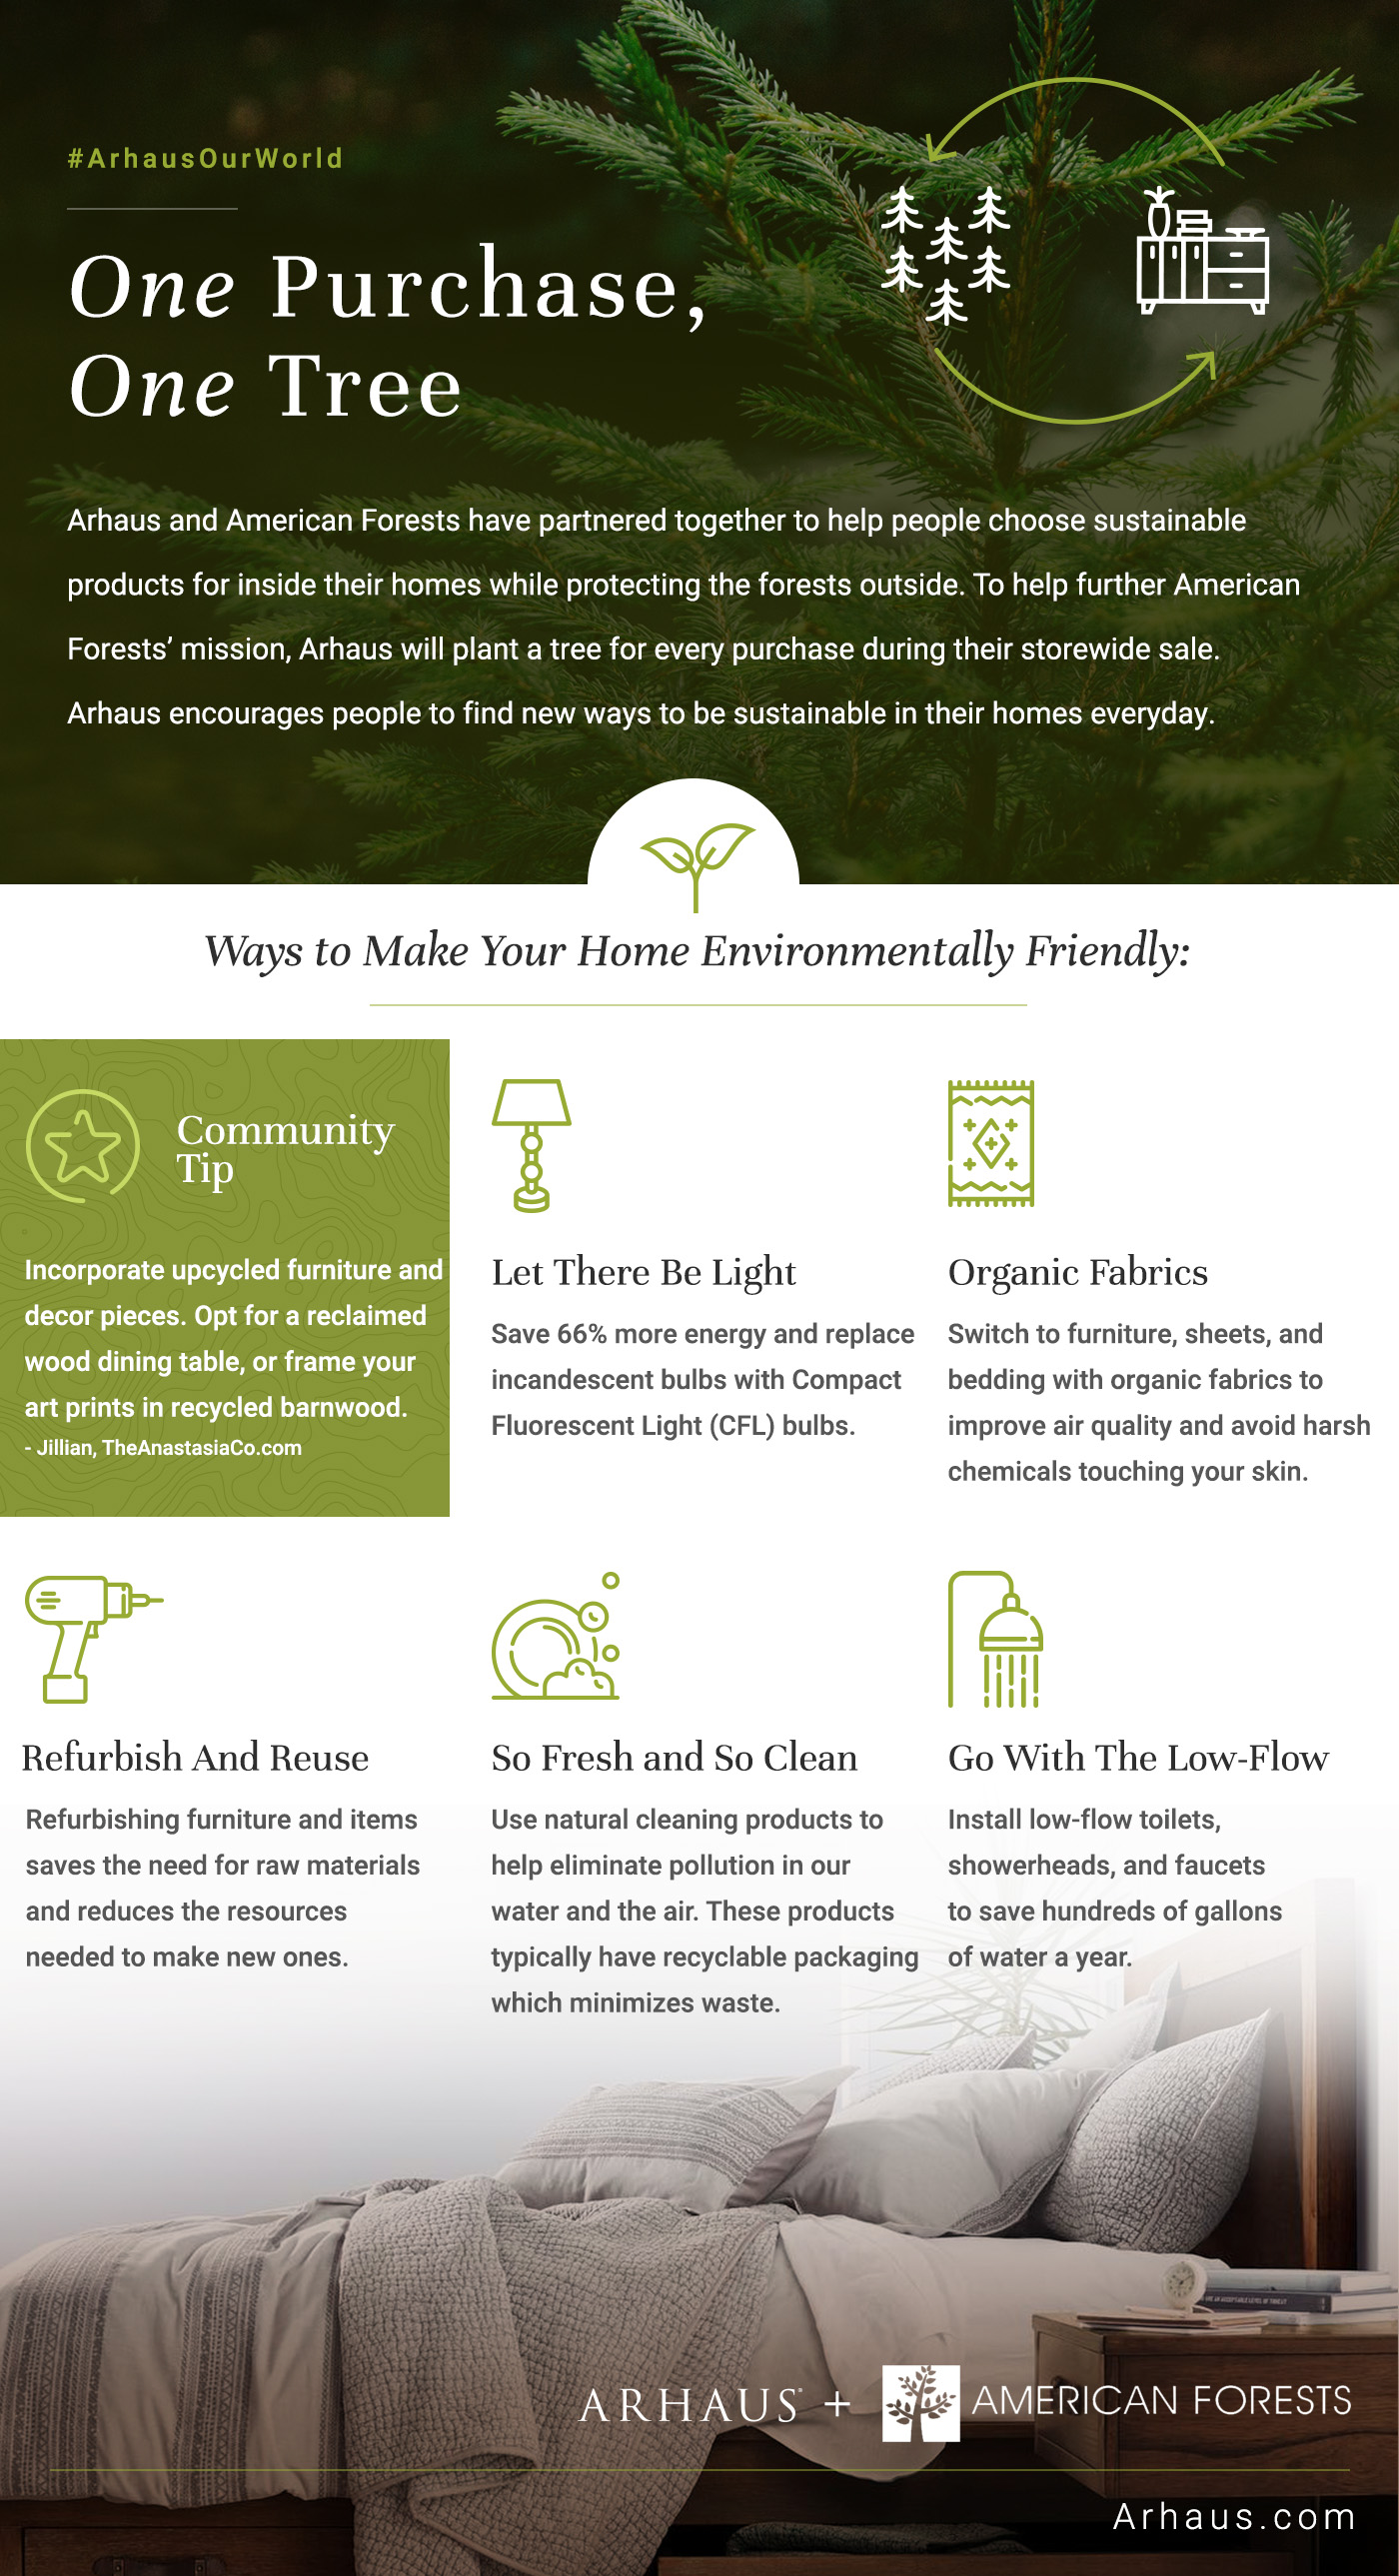 6 Ways to Go Green at Home | Go Green Ideas | Green Living | Eco Friendly Living | Sustainable Living